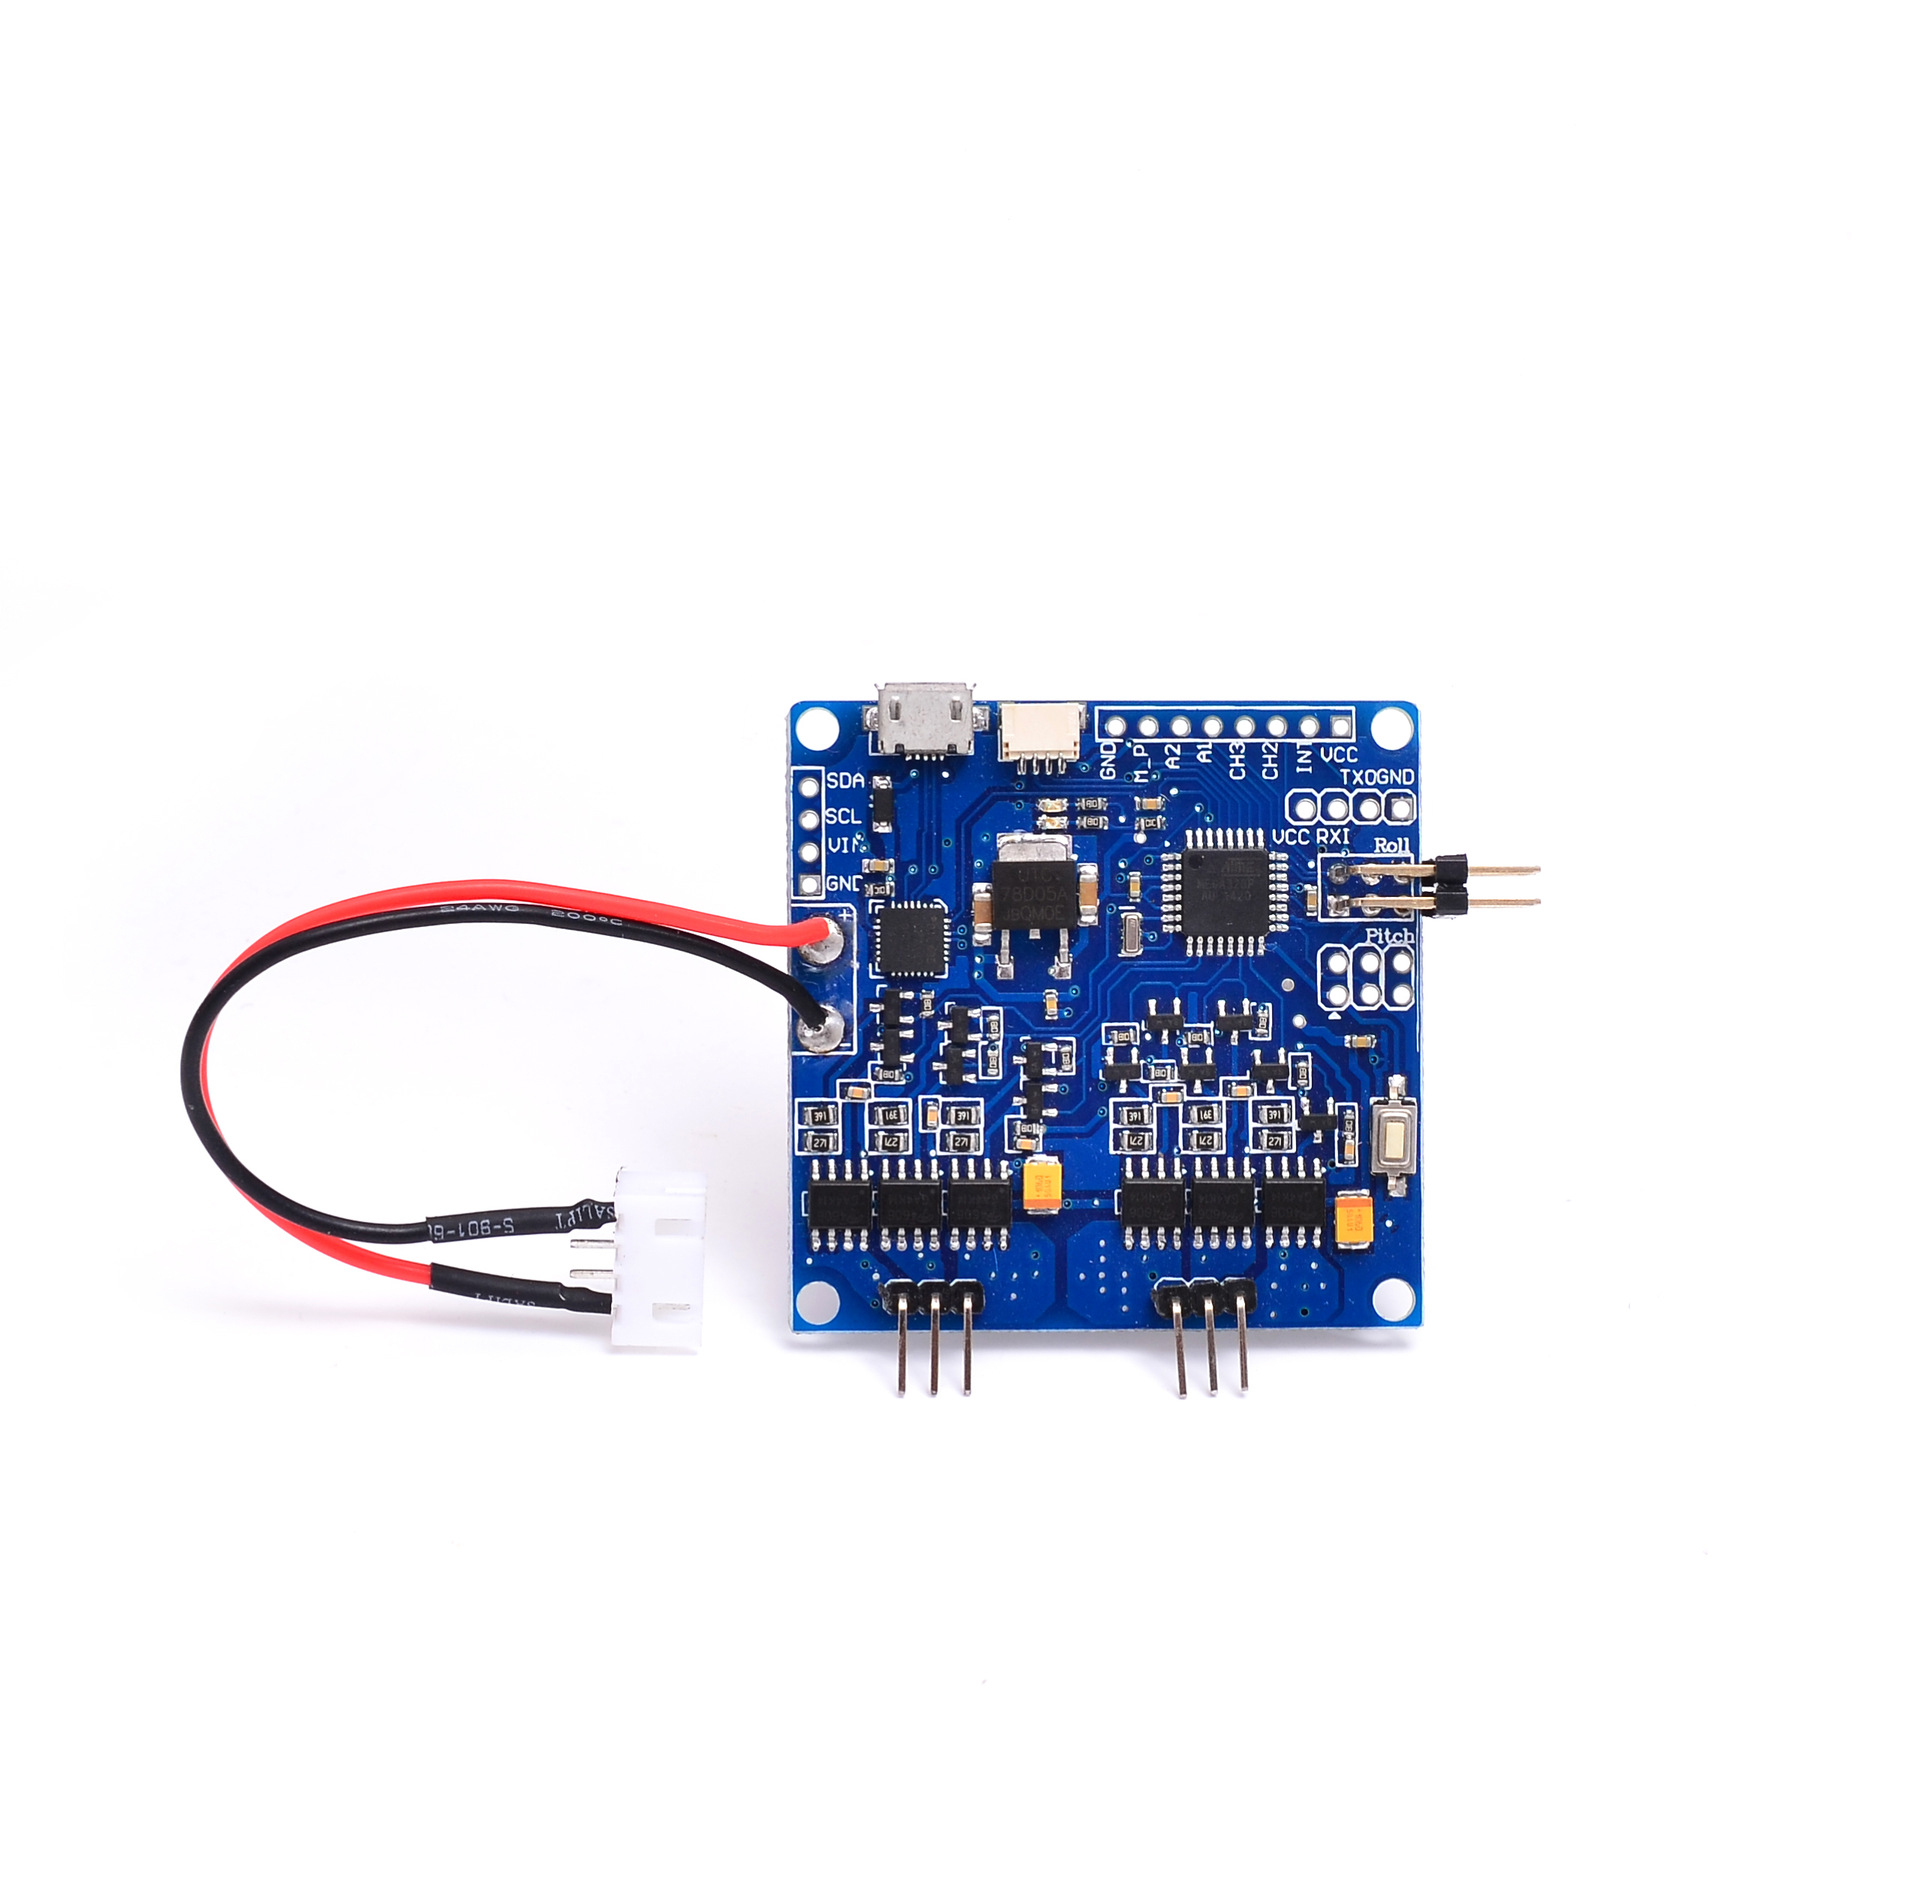 BGC2.2 MOS 3.1 2-axis Brushless Gimbal Control Board High Current with Sensor Brushless Gimbal for Racing Drone